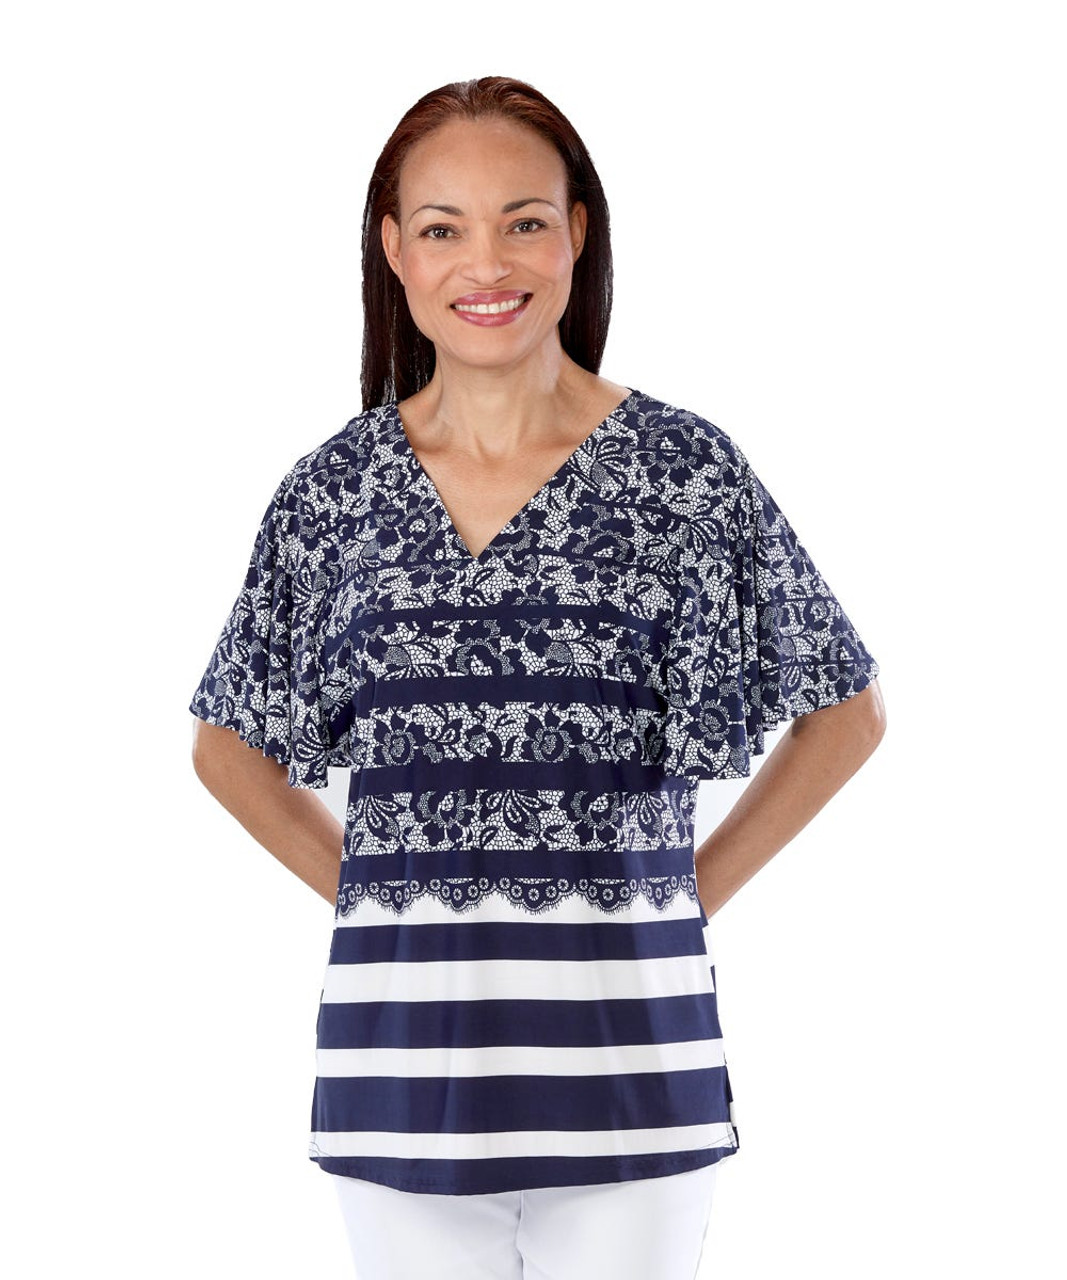 Silverts SV41080 Wide Bell Sleeve Top For Easy Self Dressing Navy Lace, Size=S, SV41080-SV1330-S